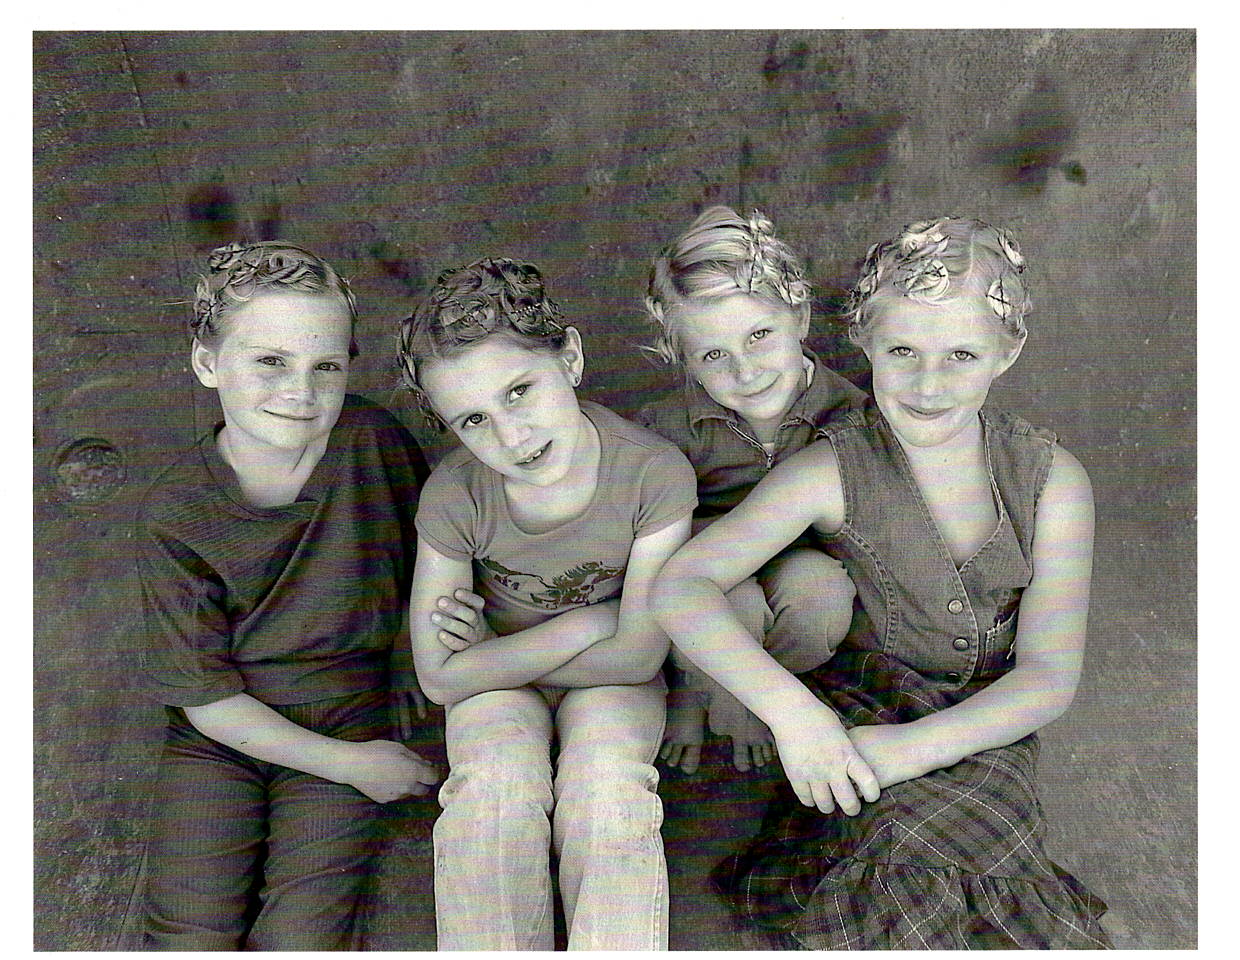 THE PINCURL GIRLS - ART ROGERS NOTE CARD